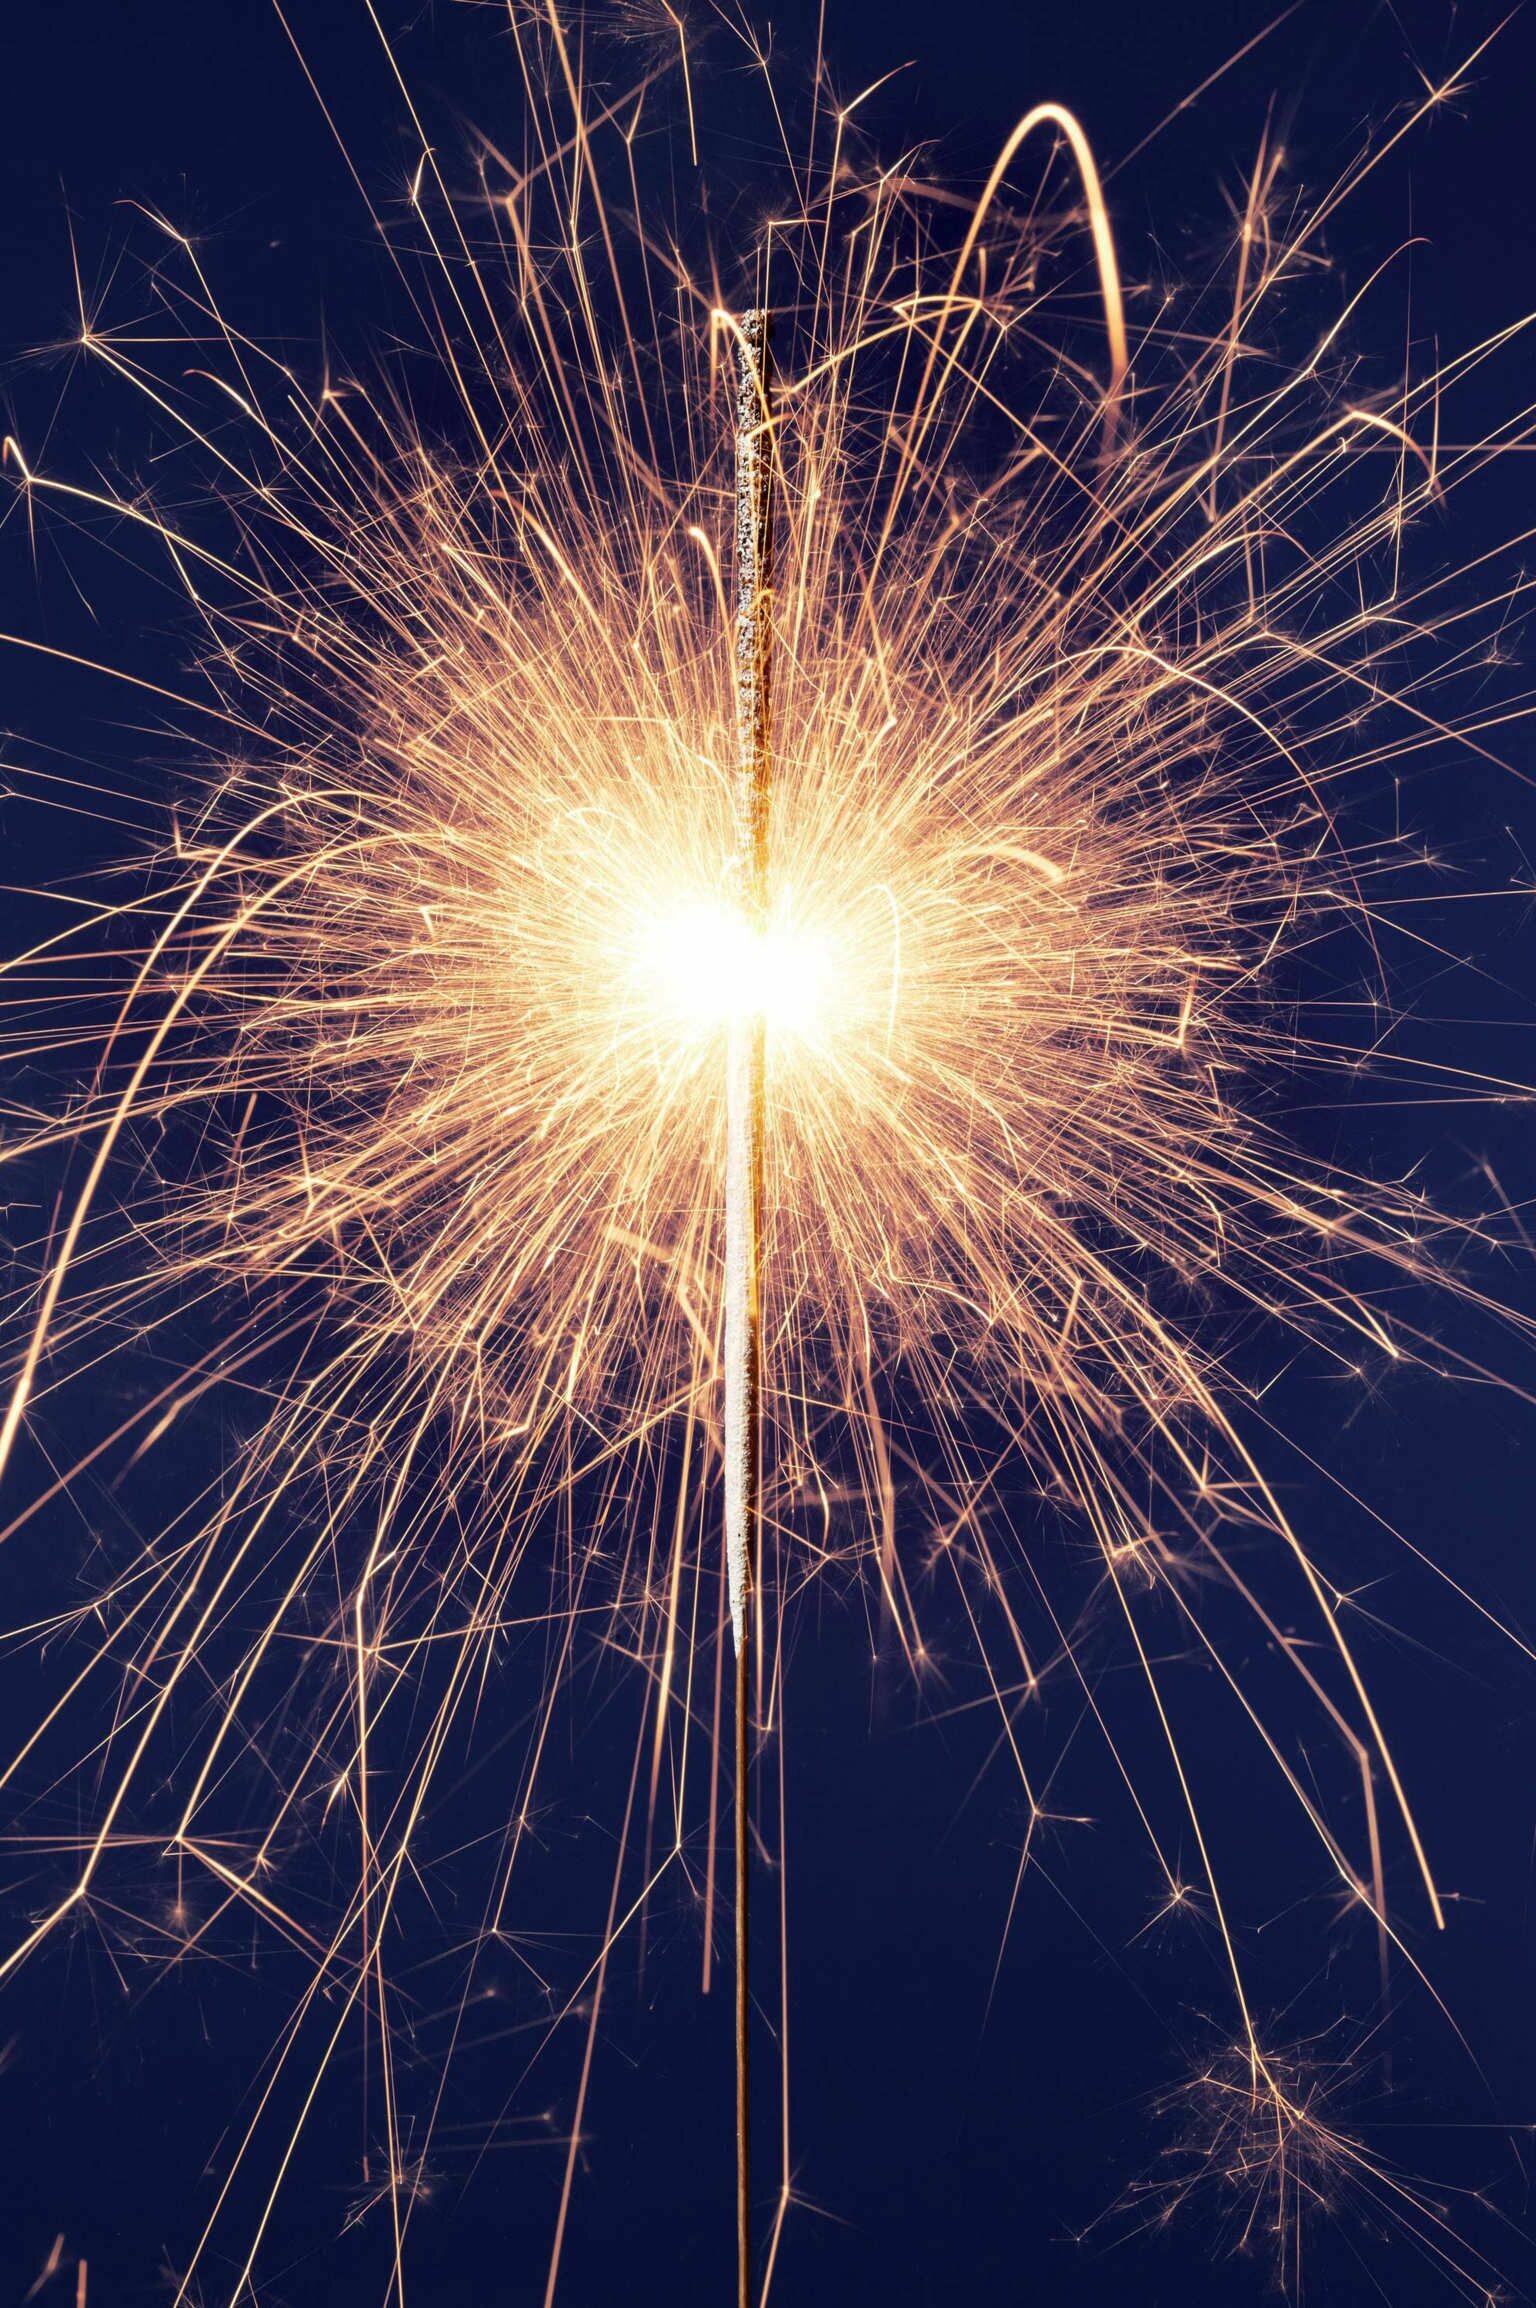 New Year: Midnight celebration, Coming year, Fireworks. 1540x2310 HD Wallpaper.